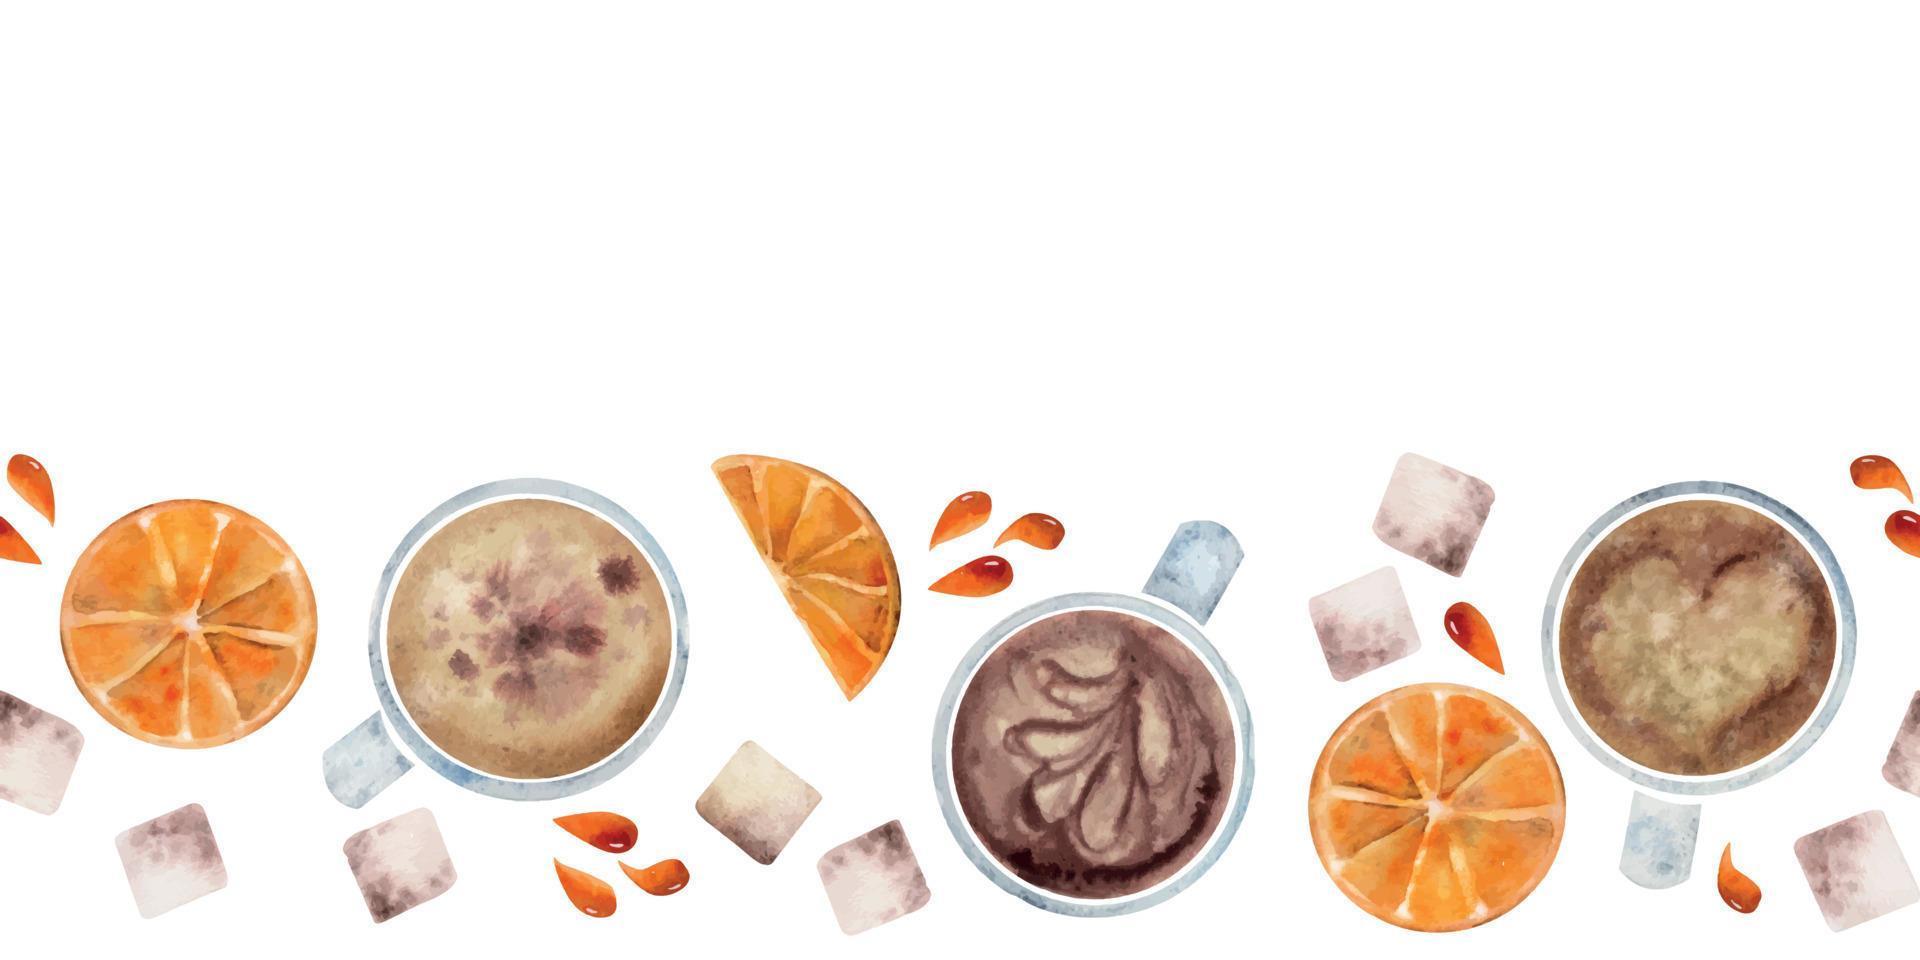 Watercolor hand drawn horizontal seamless banner with coffee cups, sugar cubes, orange slices. Isolated on white background. For invitations, cafe, restaurant food menu, print, website, cards vector